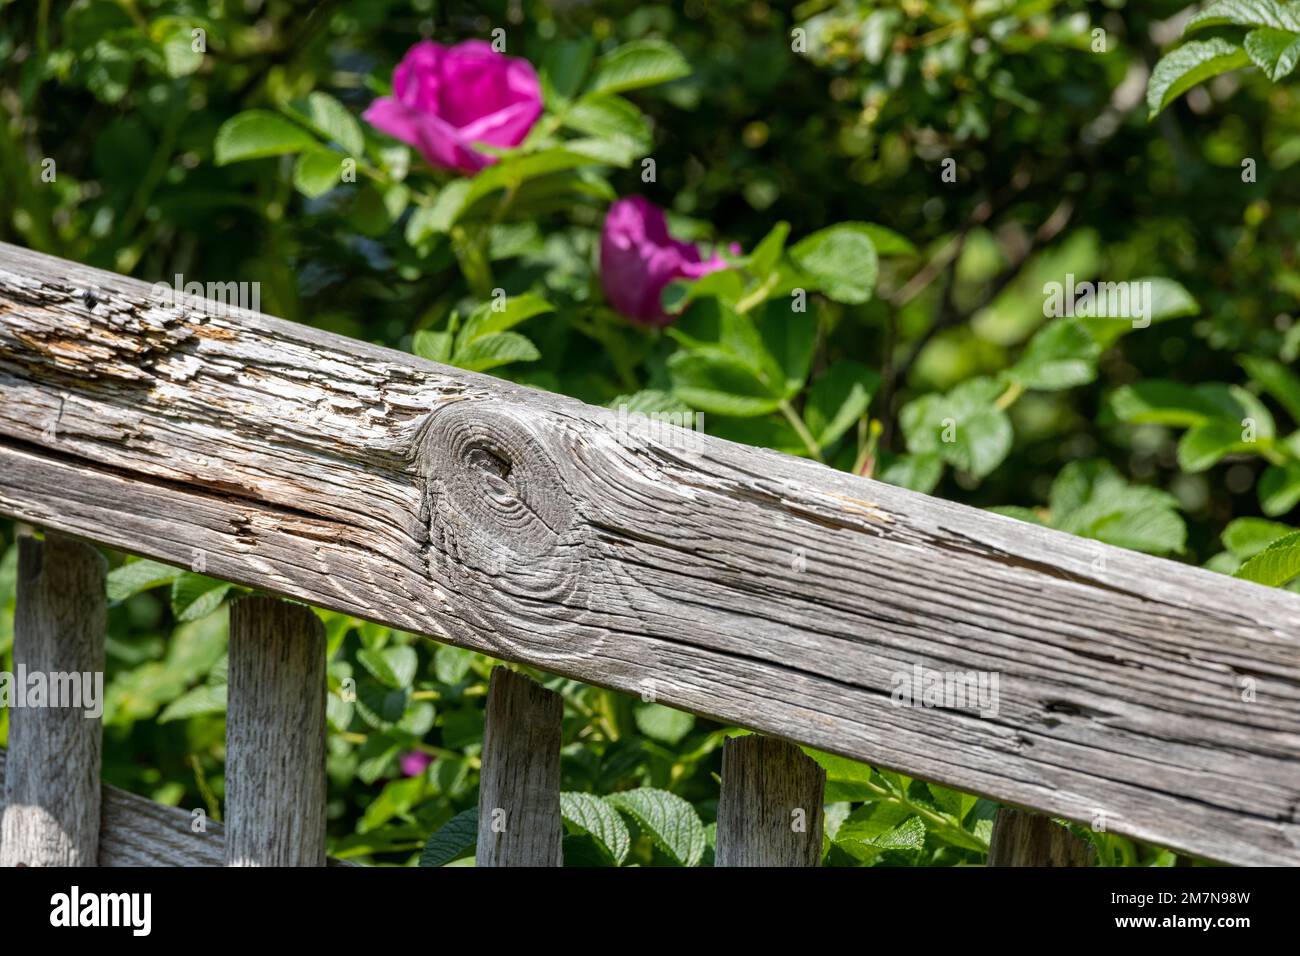 Germany, East Frisia, island Juist, old wooden picket fence. Stock Photo